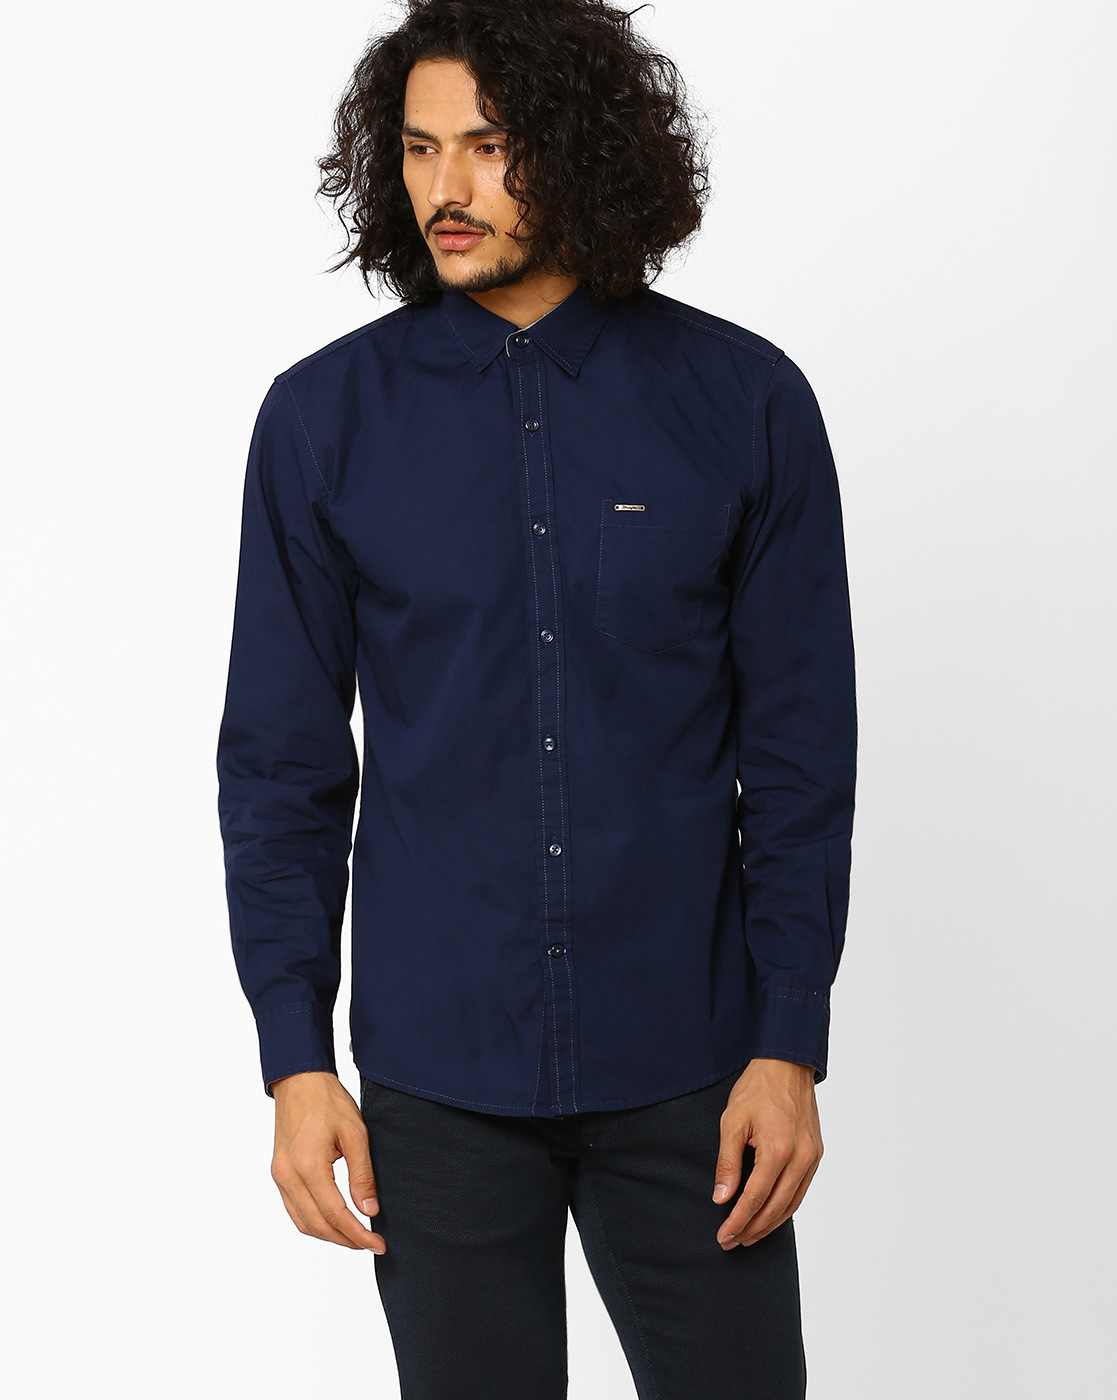 For 399/-(73% Off) WRANGLER Shirts at FLAT 50% - 80% OFF + Extra Rs. 500 OFF + Free Shipping at Ajio